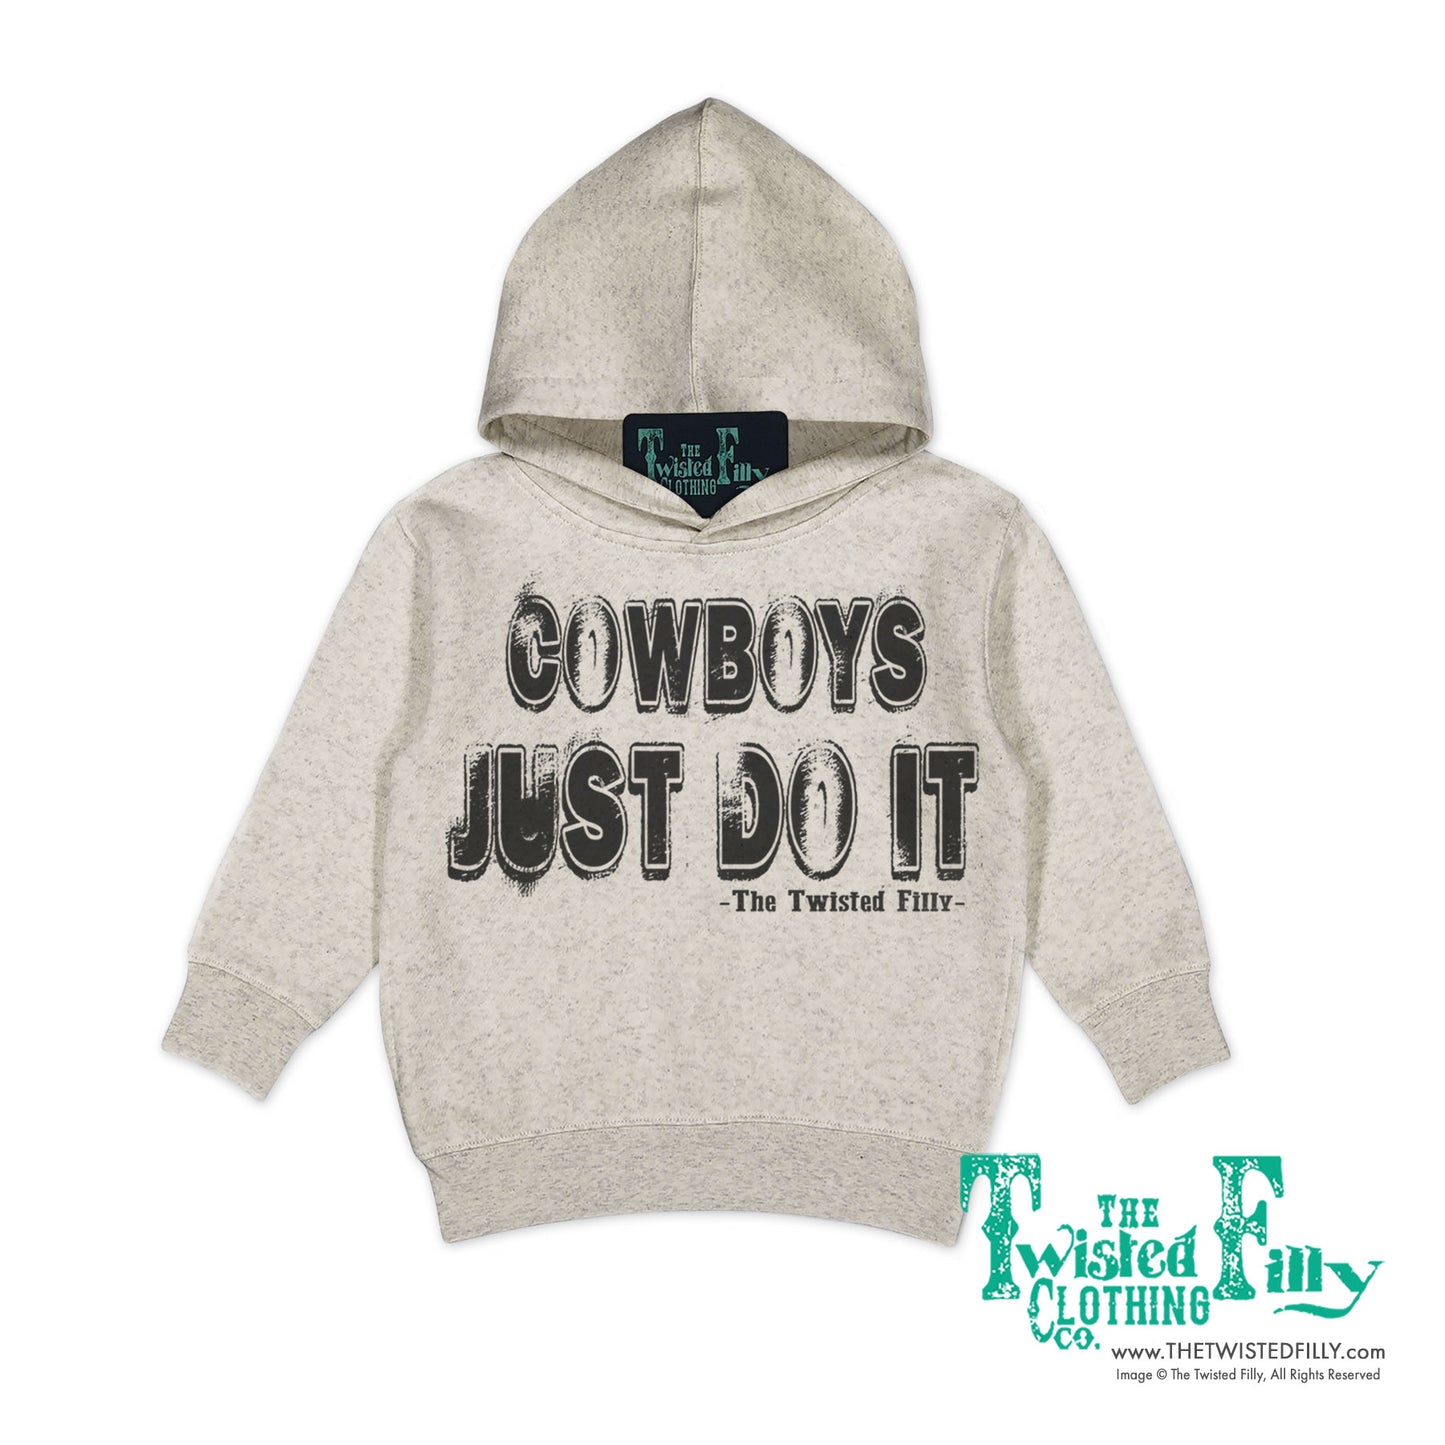 Cowboys Just Do It - Toddler Boys Hoodie - Assorted Colors